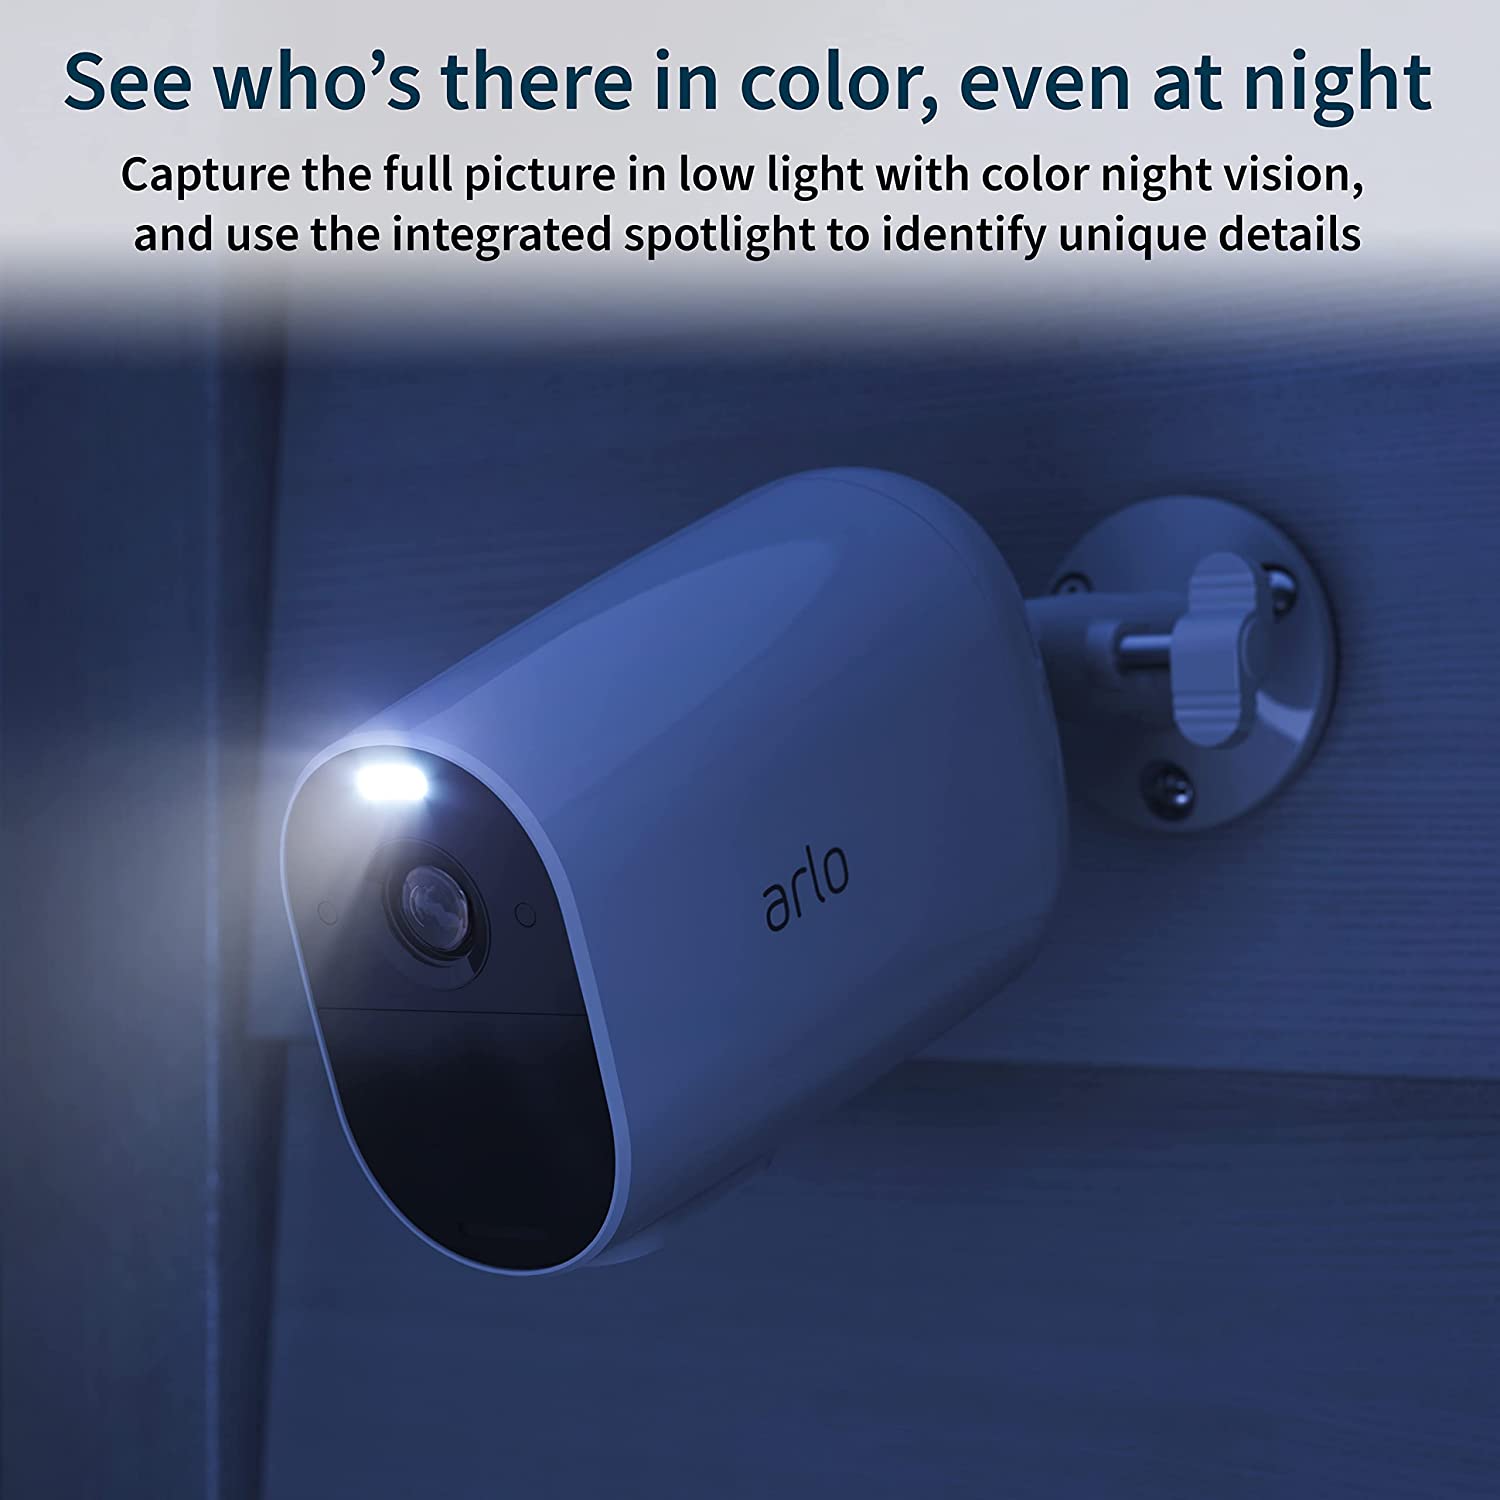 Arlo Essential Spotlight Camera - 3 Pack - Wireless Security, 1080p Video, Color Night Vision, 2 Way Audio, Wire-Free, Direct to WiFi No Hub Needed, Works with Alexa, Black - VMC2330B